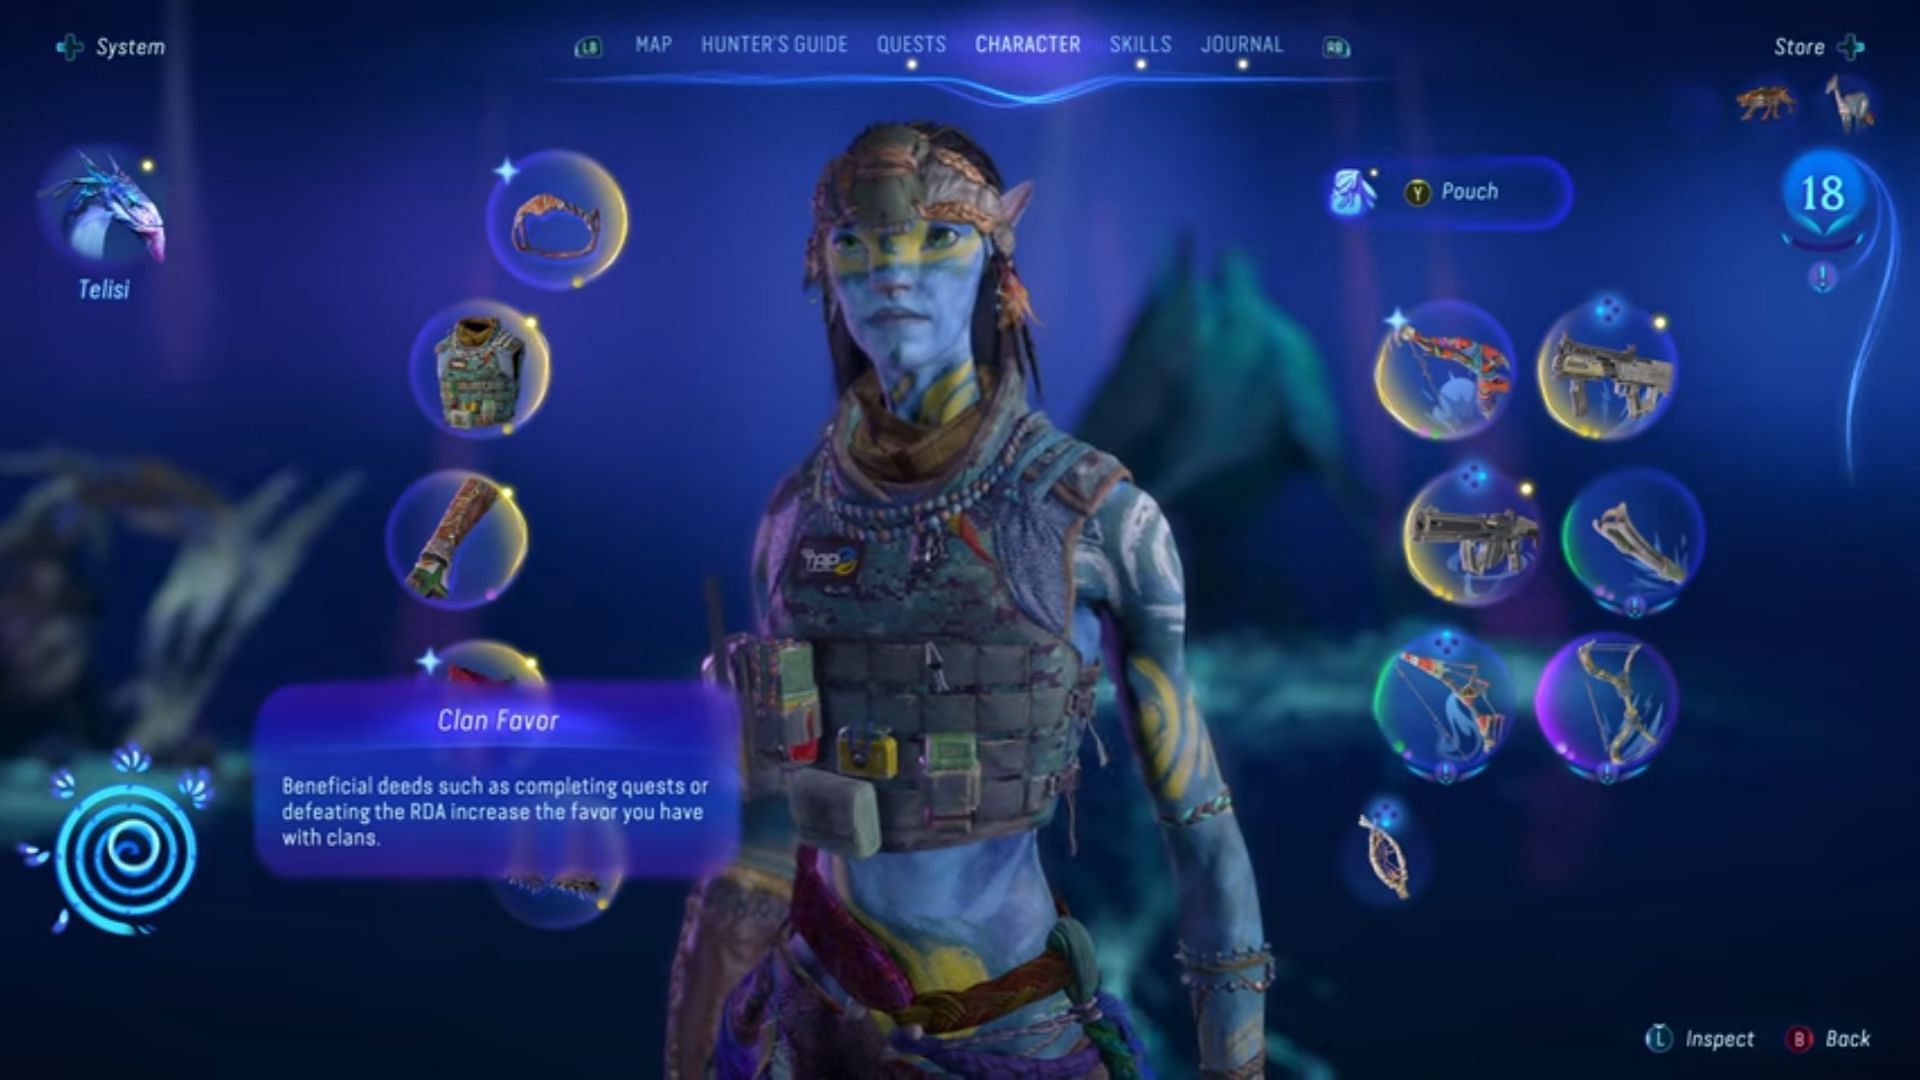 You can access the Clan Favor from the Character tab (Image via Ubisoft/LaserBolt)